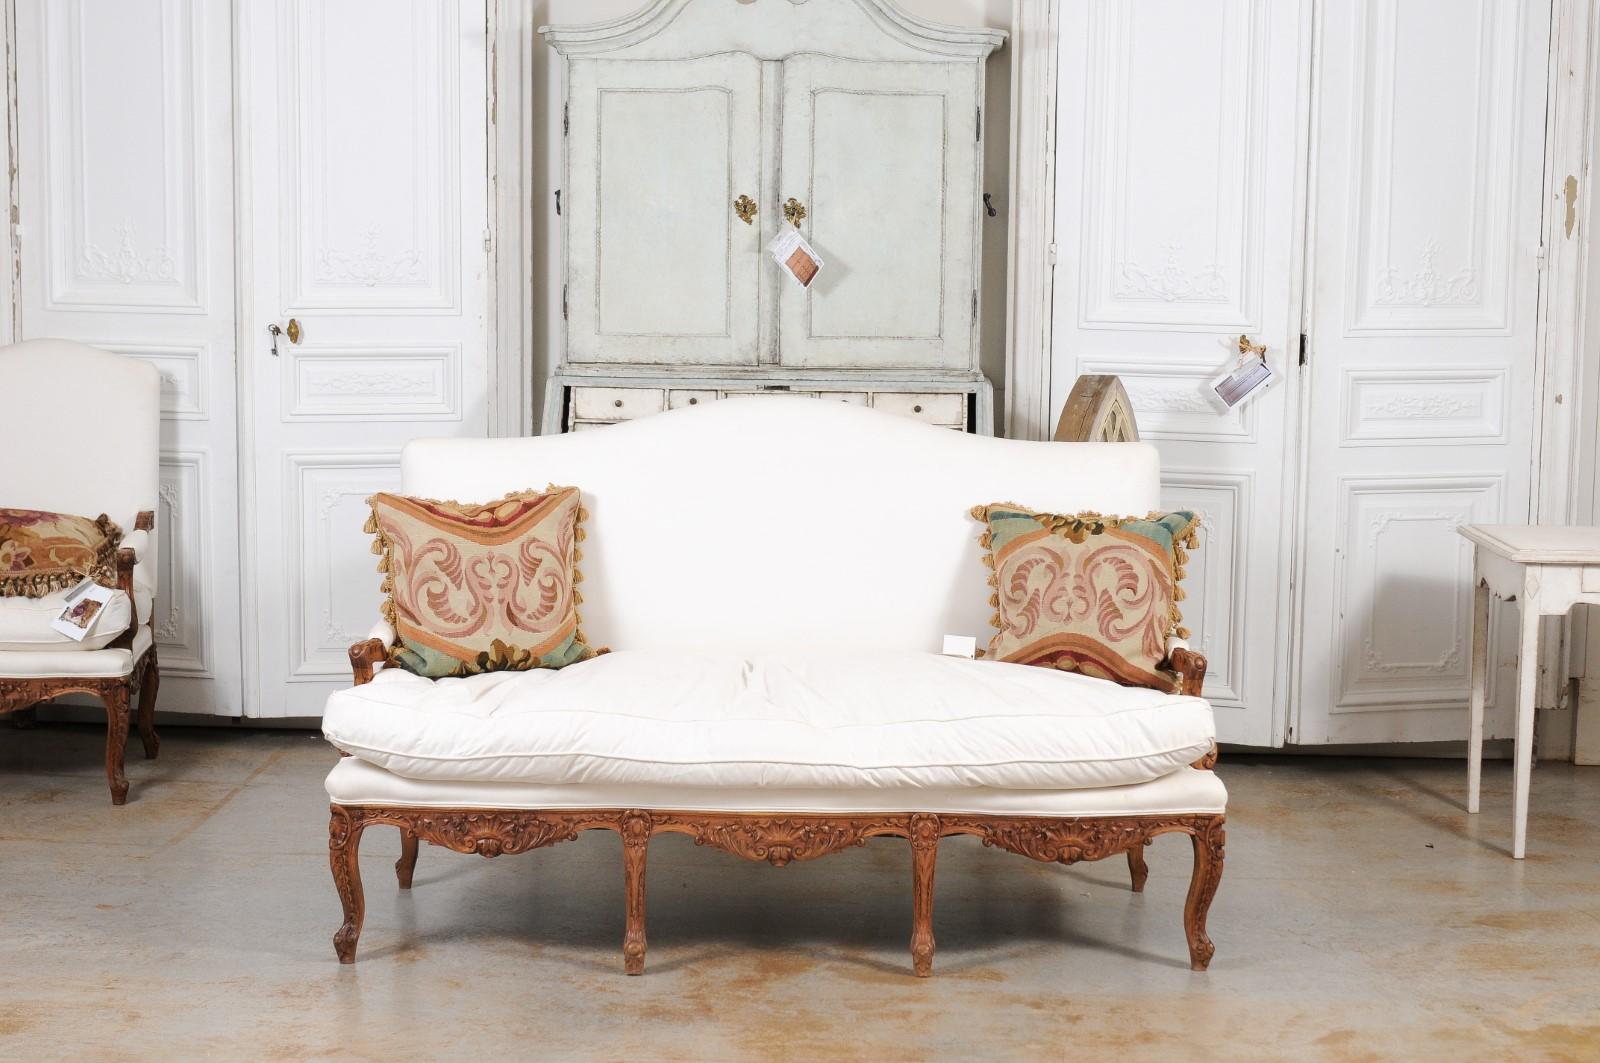 A French Régence style carved wood canapé from the mid-19th century, with new upholstery. Created in France in the early years of Emperor Napoleon III's reign, this Régence style three-seat sofa features a slightly slanted camelback, flanked with